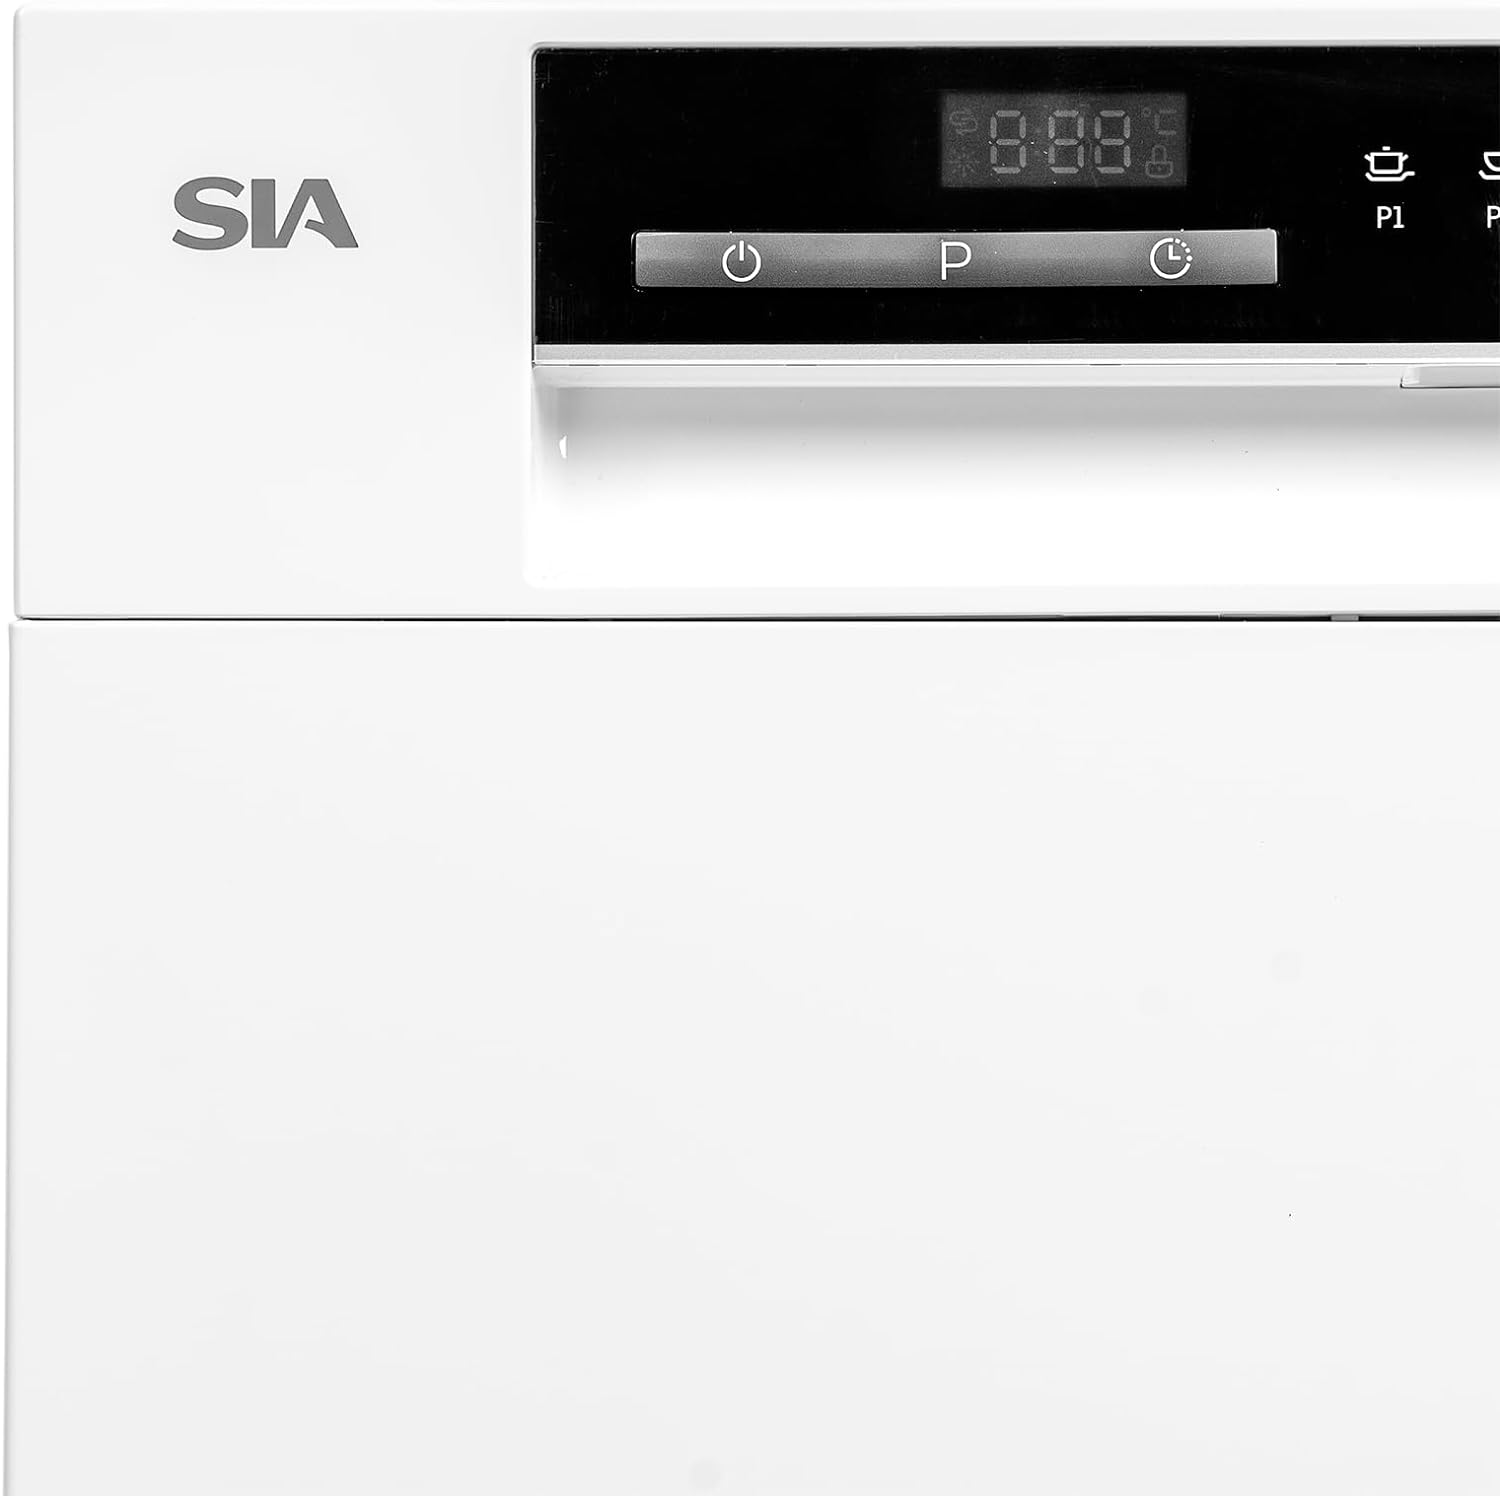 Table Top Dishwasher In White, 6 Places 6 Programmes LED Display 24 Hour Delay Start W55 x D50 x H43.8cm - SIA TTD6W - Amazing Gadgets Outlet